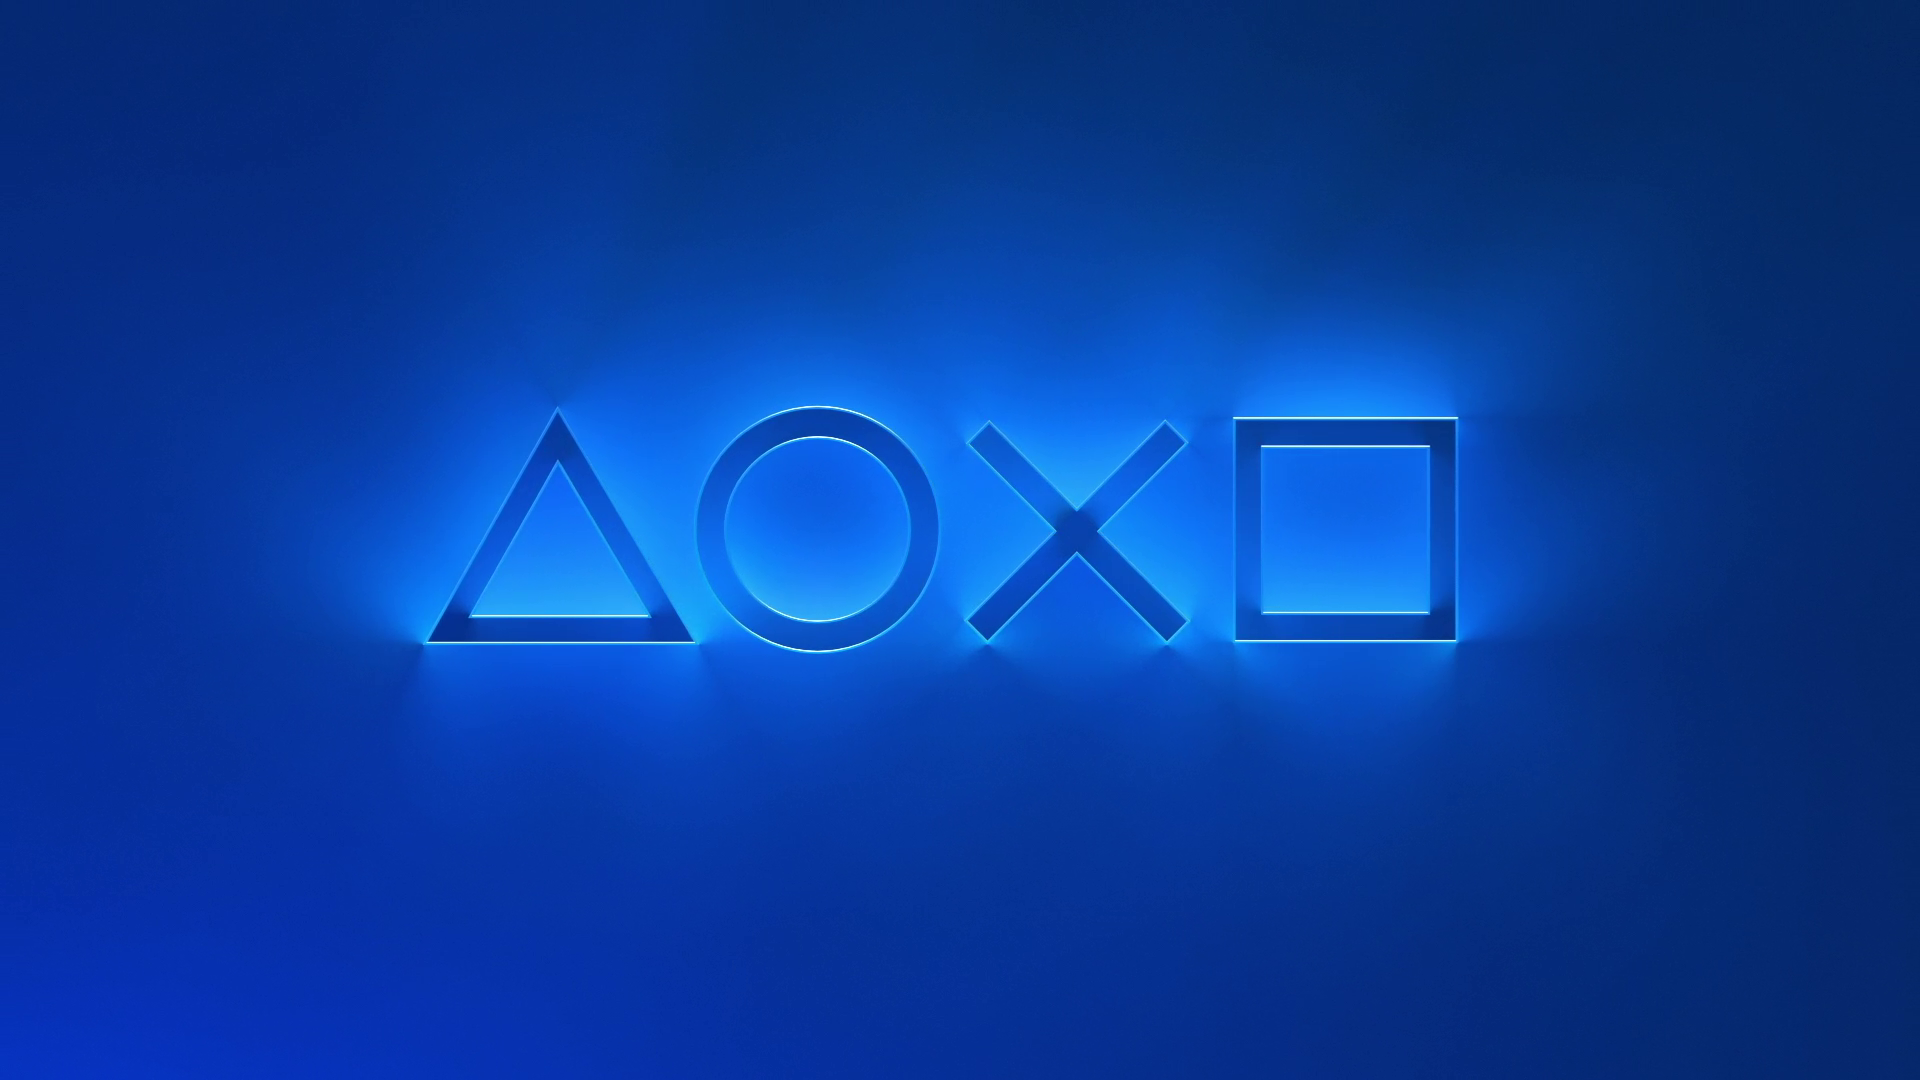 PS5 future of gaming event title screen with controller buttons